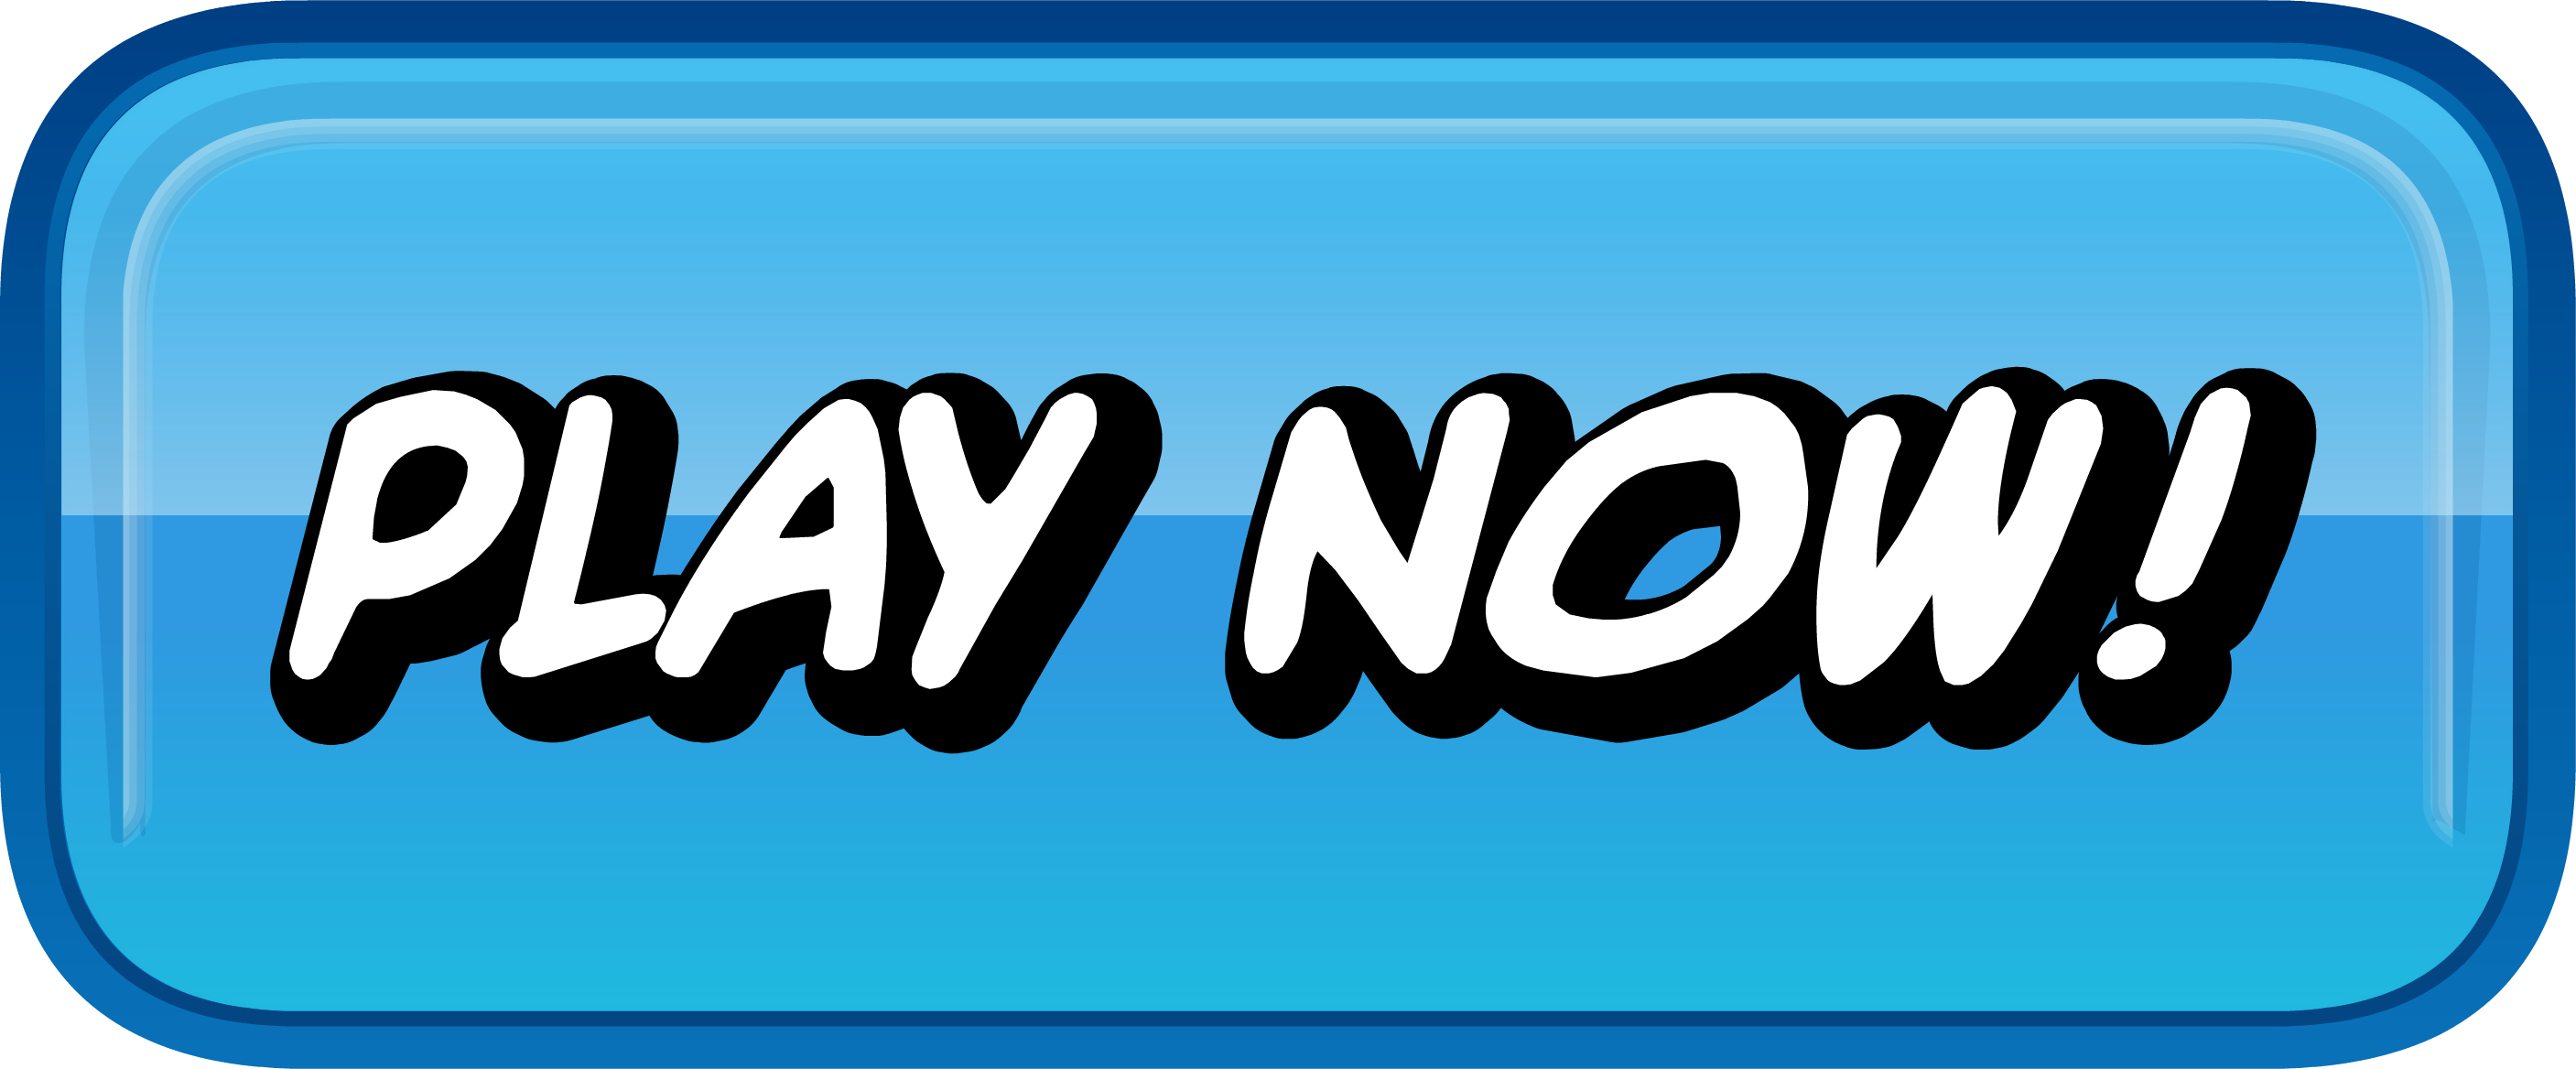 Play Now Button Png Photos - Play Now Button, Transparent background PNG HD thumbnail